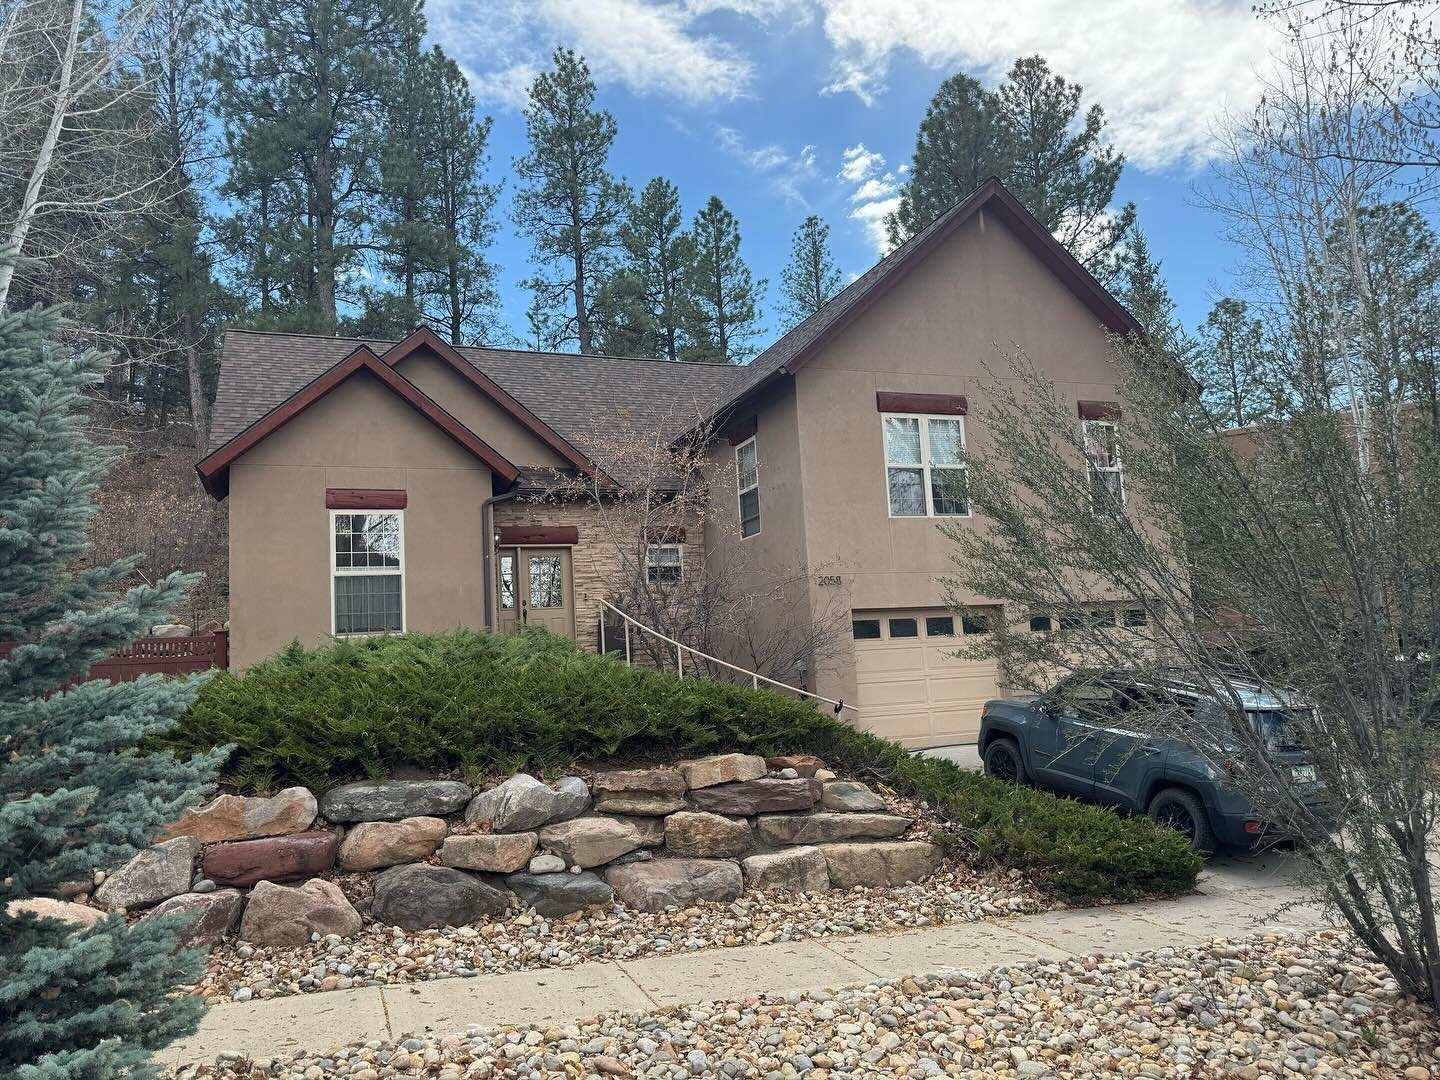 Exceptional craftsmanship, unparalleled durability: another residential roof completed to perfection by Steel Mountain Roofing &amp; Construction. 
.
.
#DurangoRoofing #ColoradoRoofers #DurangoHomes #RoofingExperts #SteelMountainRoofing #DurangoConst